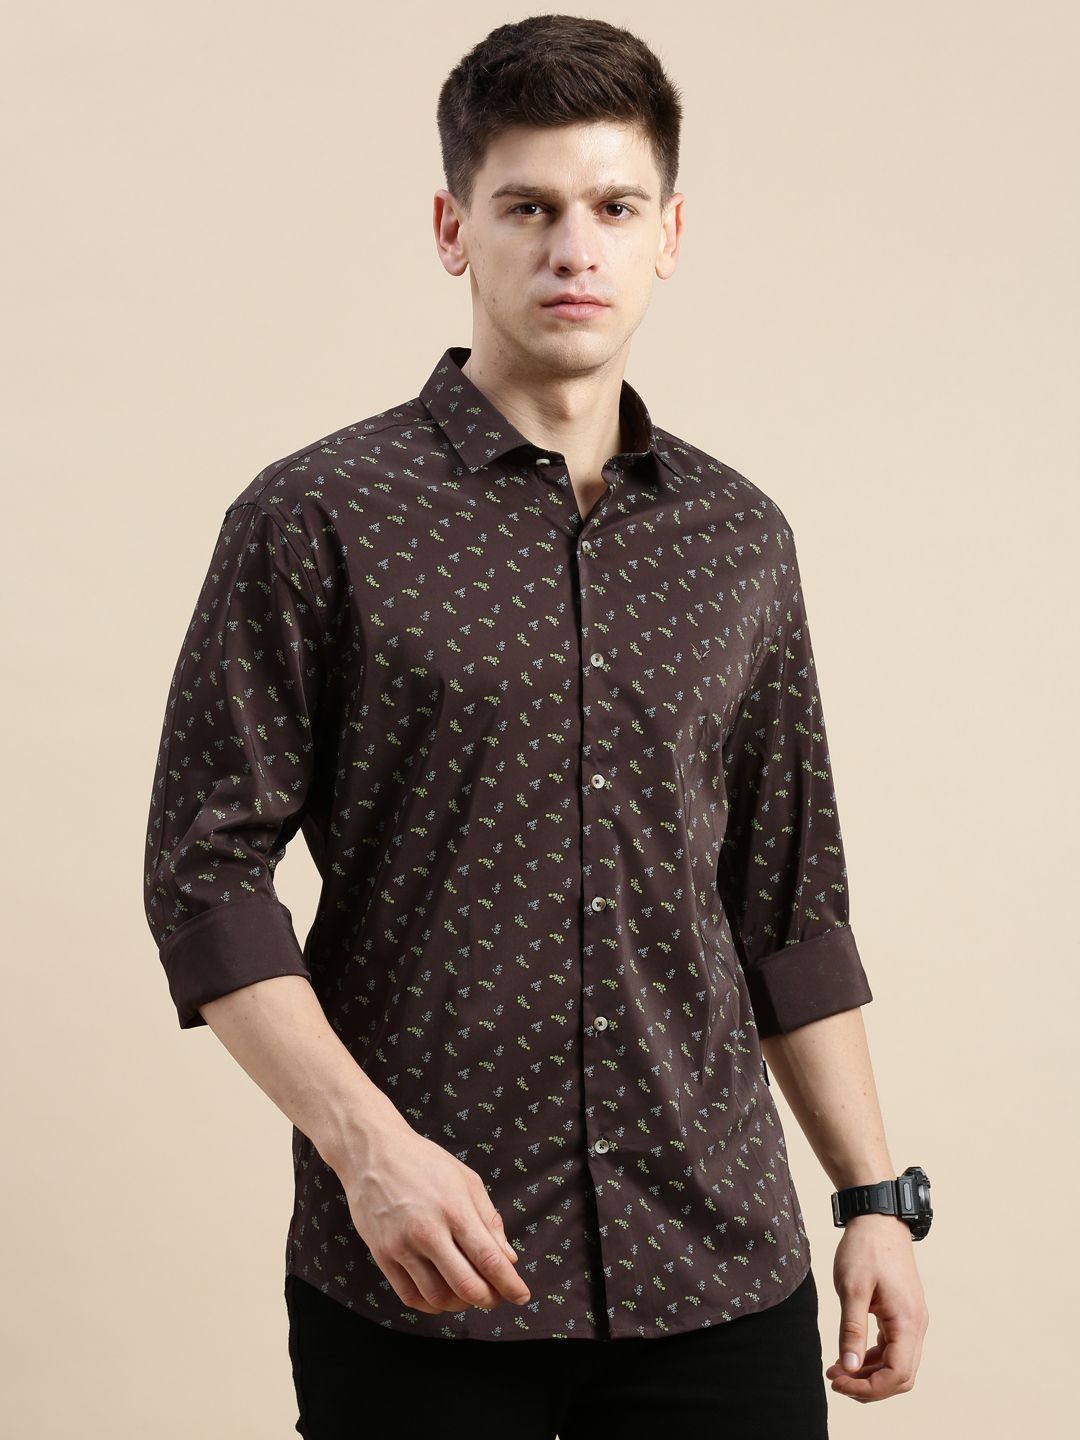     			Showoff Cotton Blend Regular Fit Printed Full Sleeves Men's Casual Shirt - Coffee ( Pack of 1 )